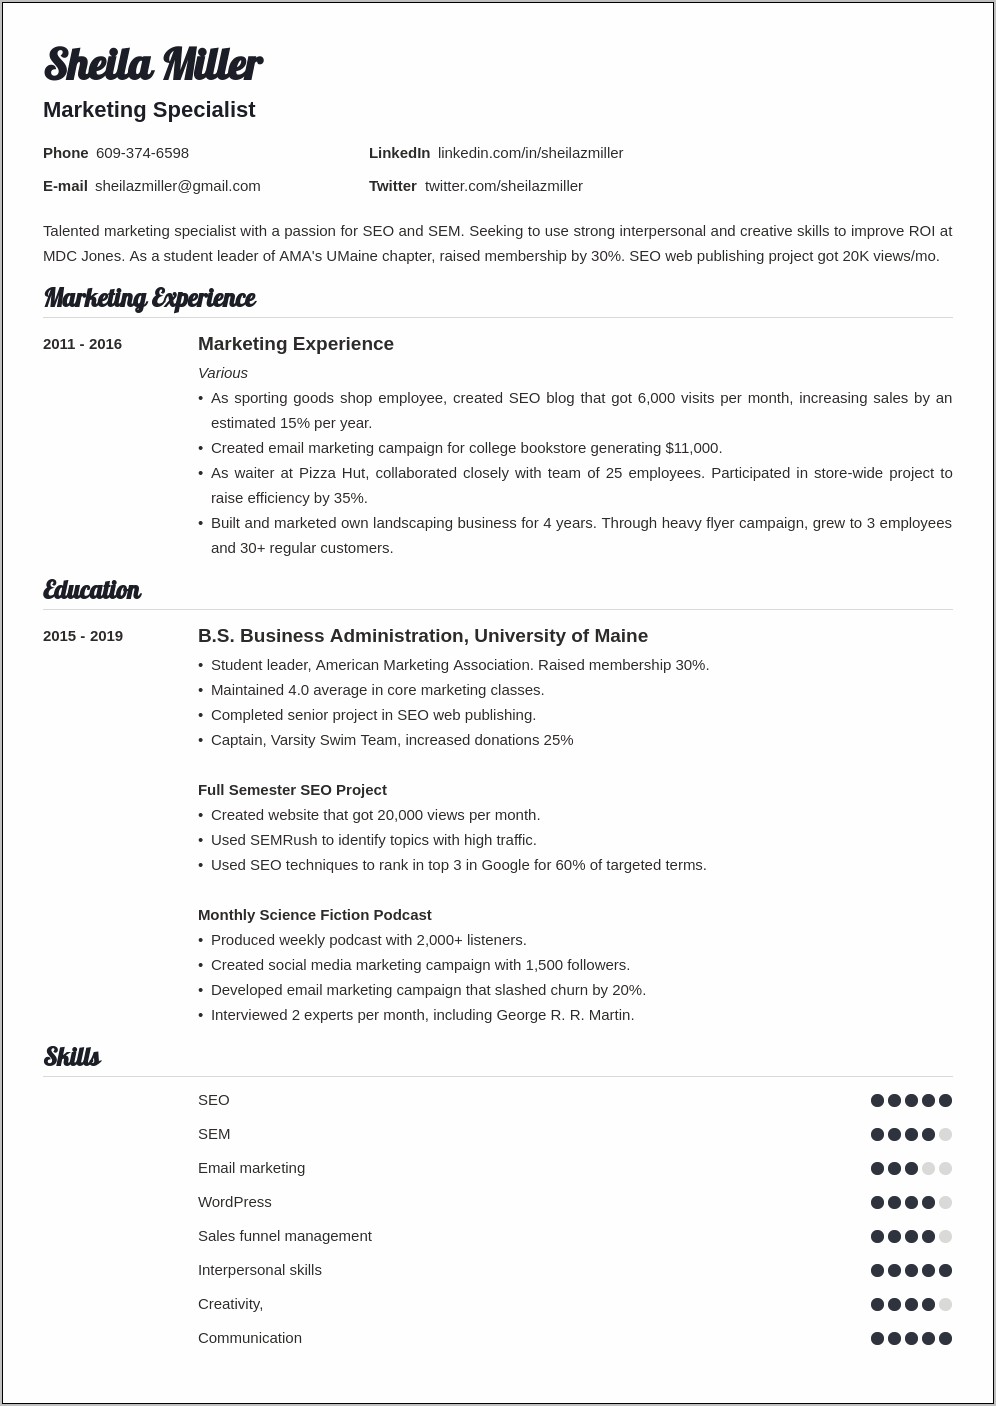 Resume Objective For Marketing Student